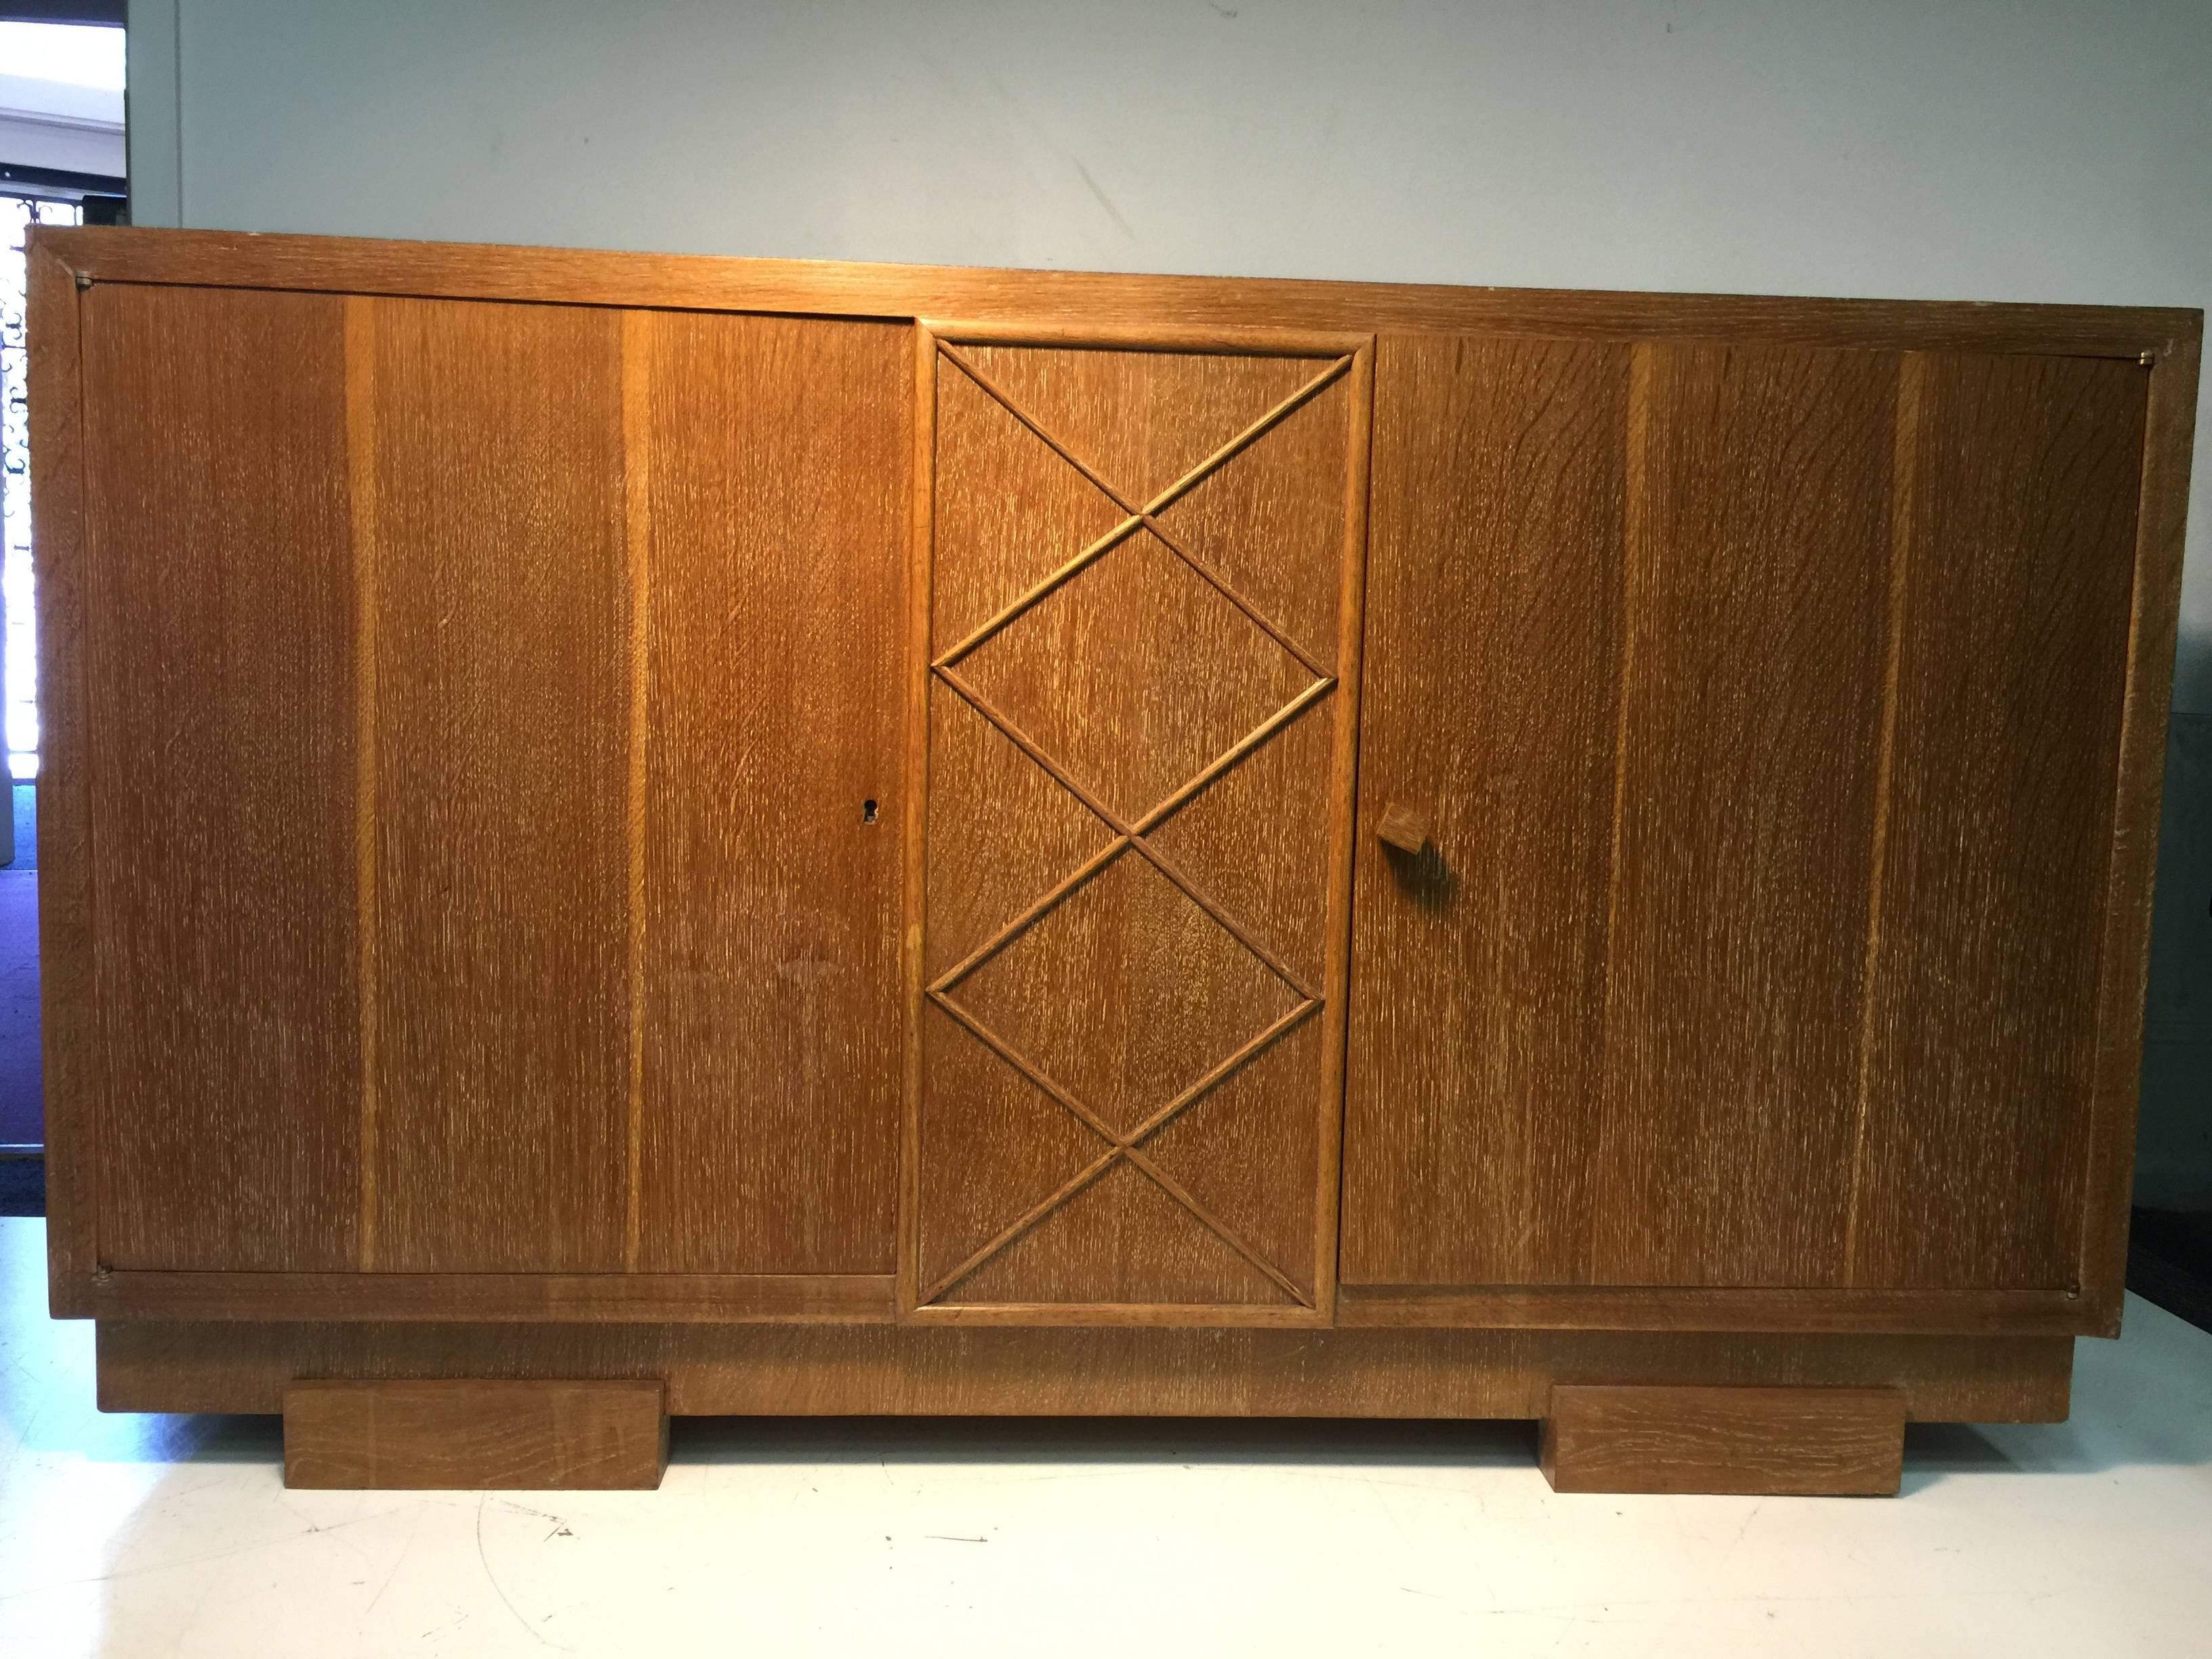 An unusual 1950s French sideboard or cabinet in cerused oak attributed to Jacques Adnet.